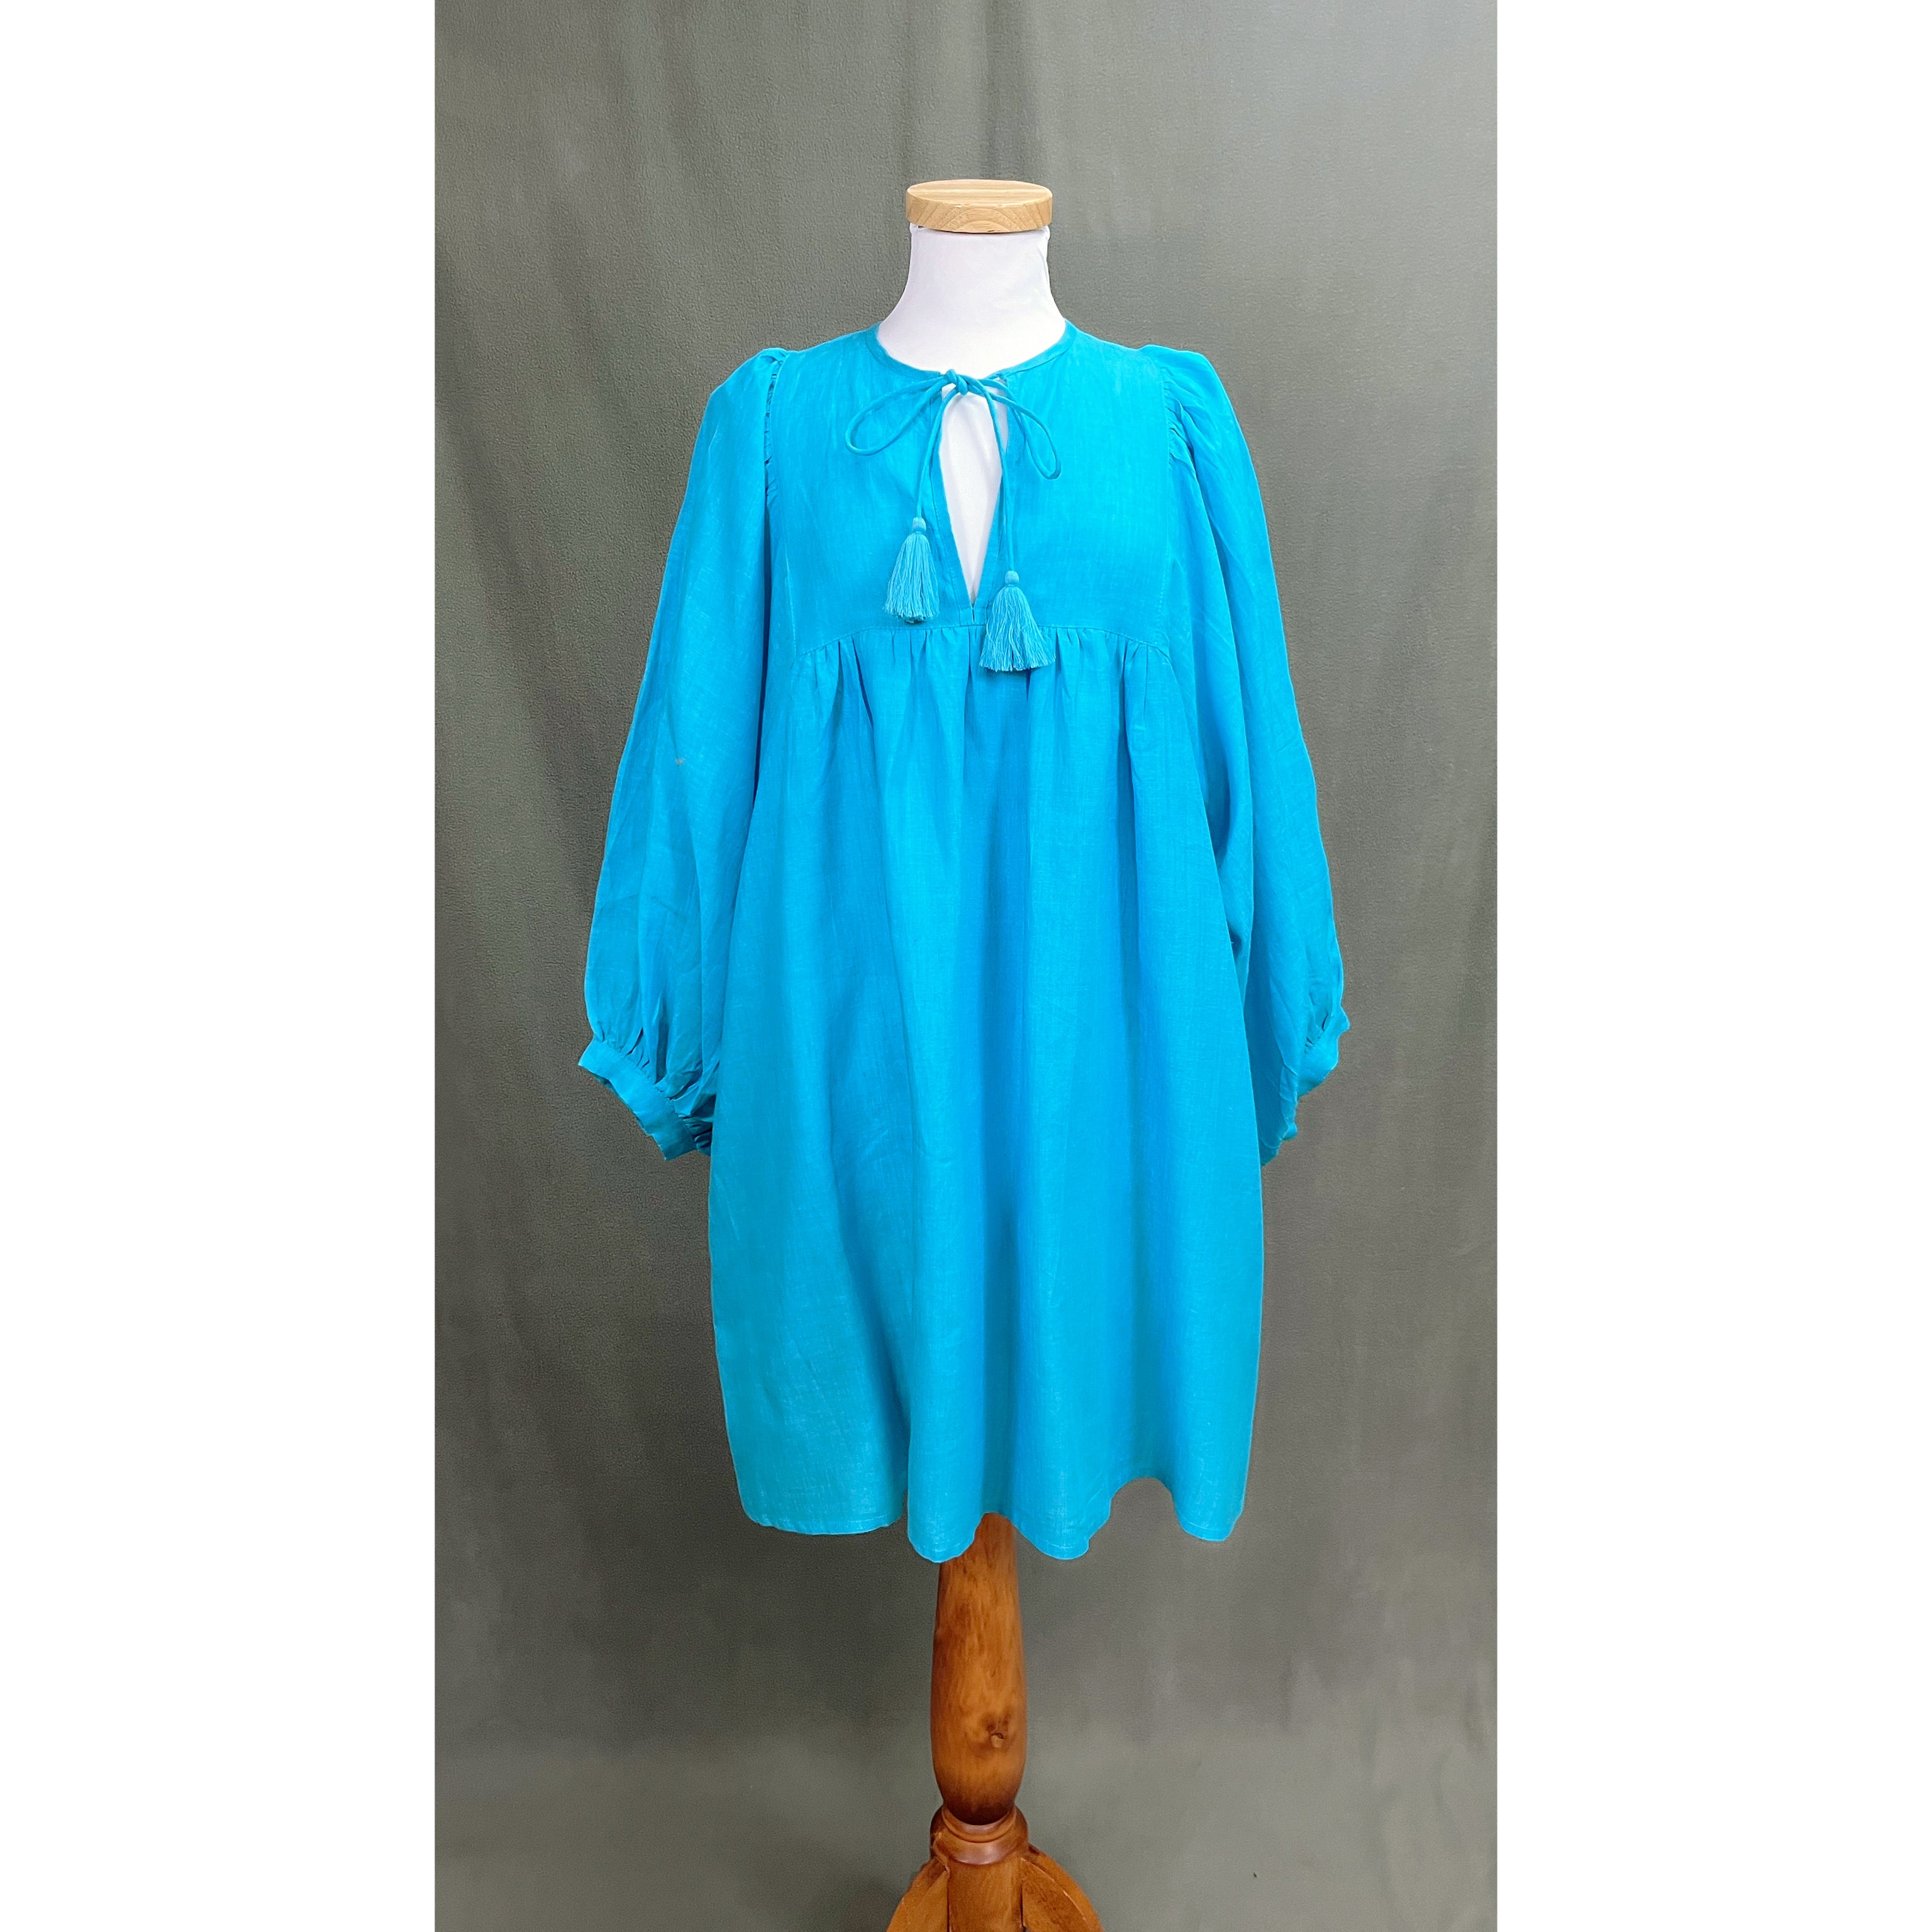 Mille turquoise linen Daisy dress, size L, NEW WITH TAGS!